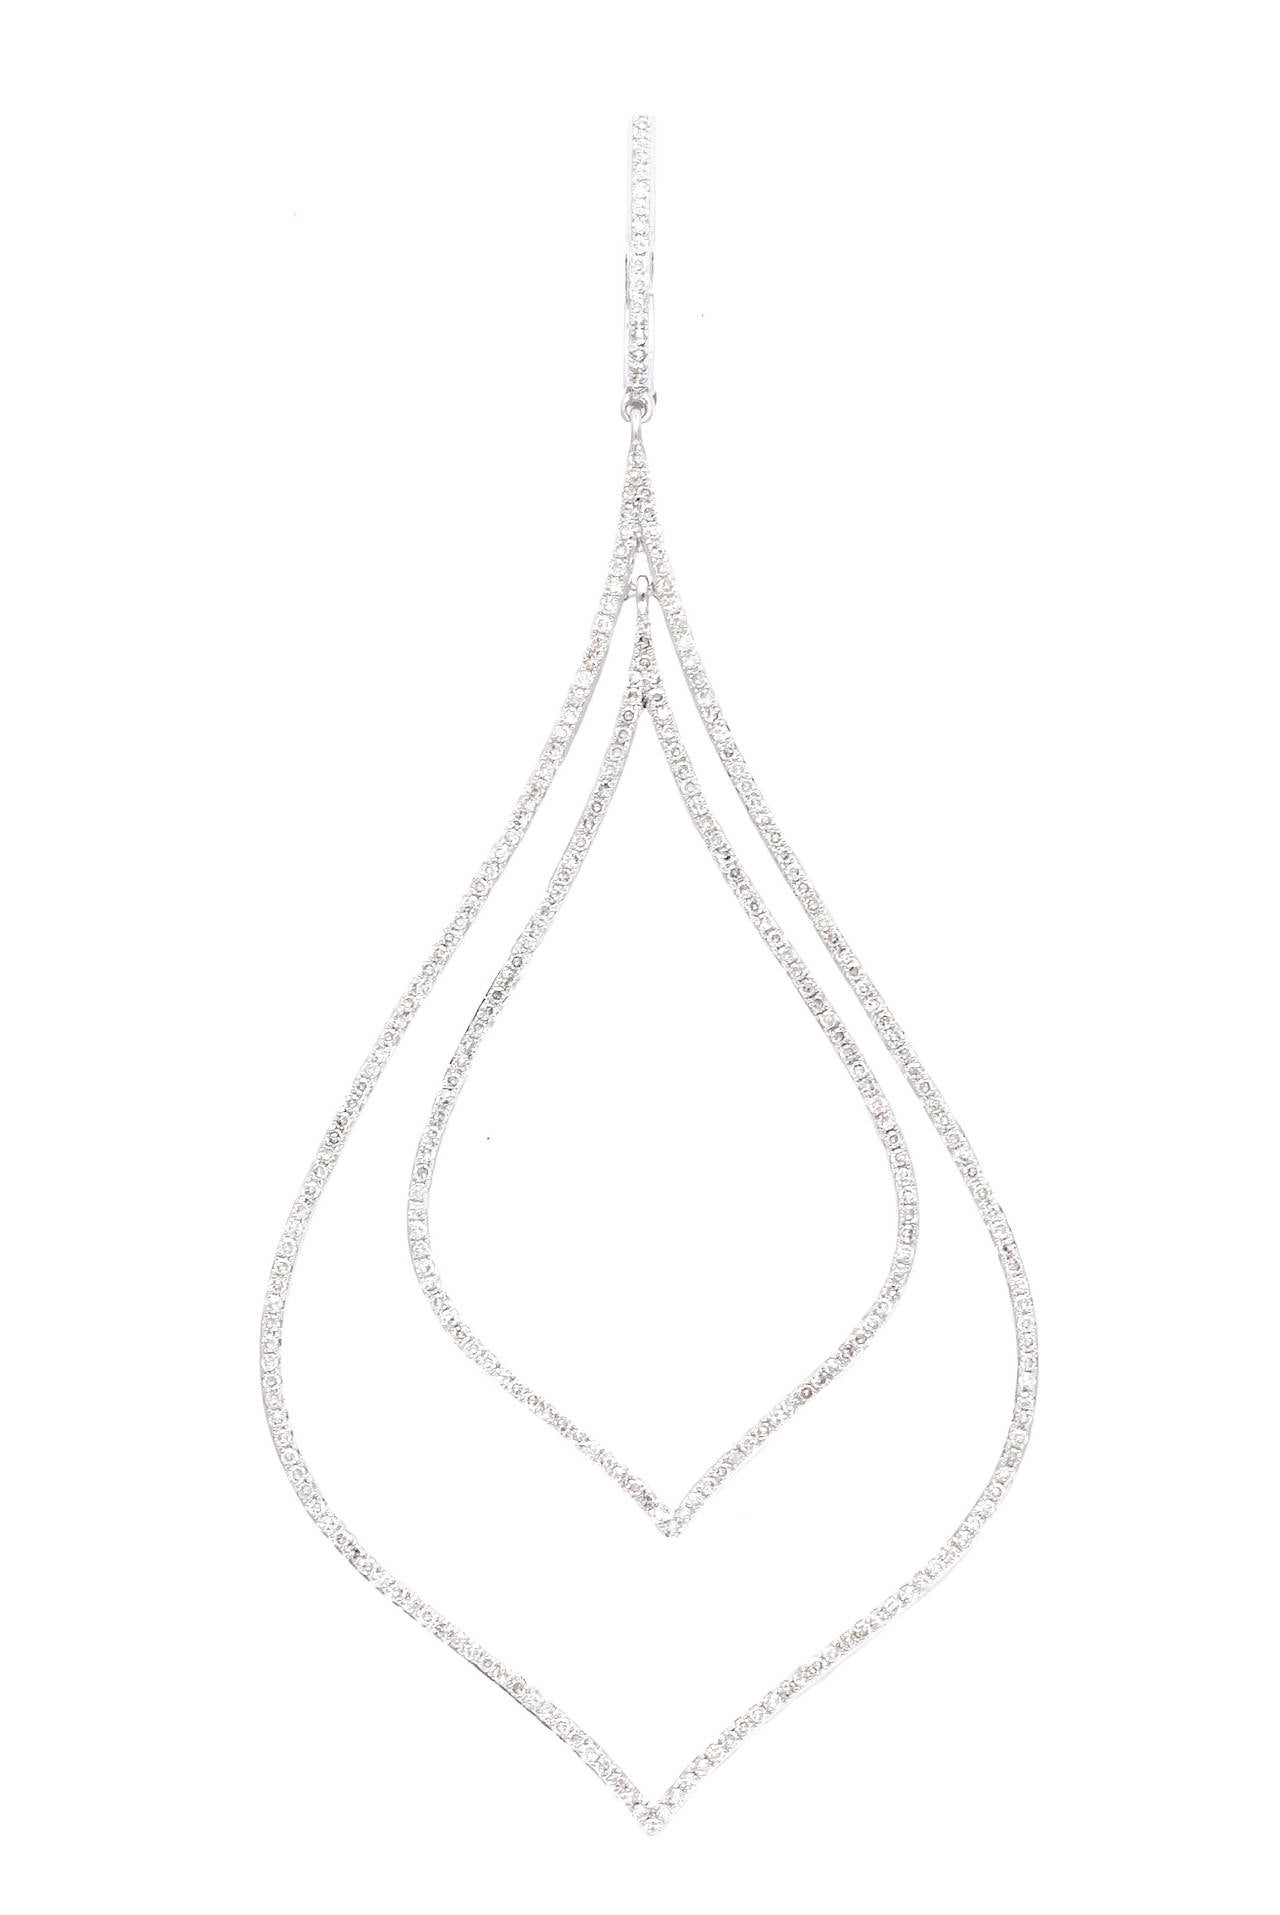 Carefully set with all full cut diamonds, these dramatic, double drops measure a full 3 1/2 inches in length.  While certainly dramatic, they are stylish and a light and airy pleasure to wear.